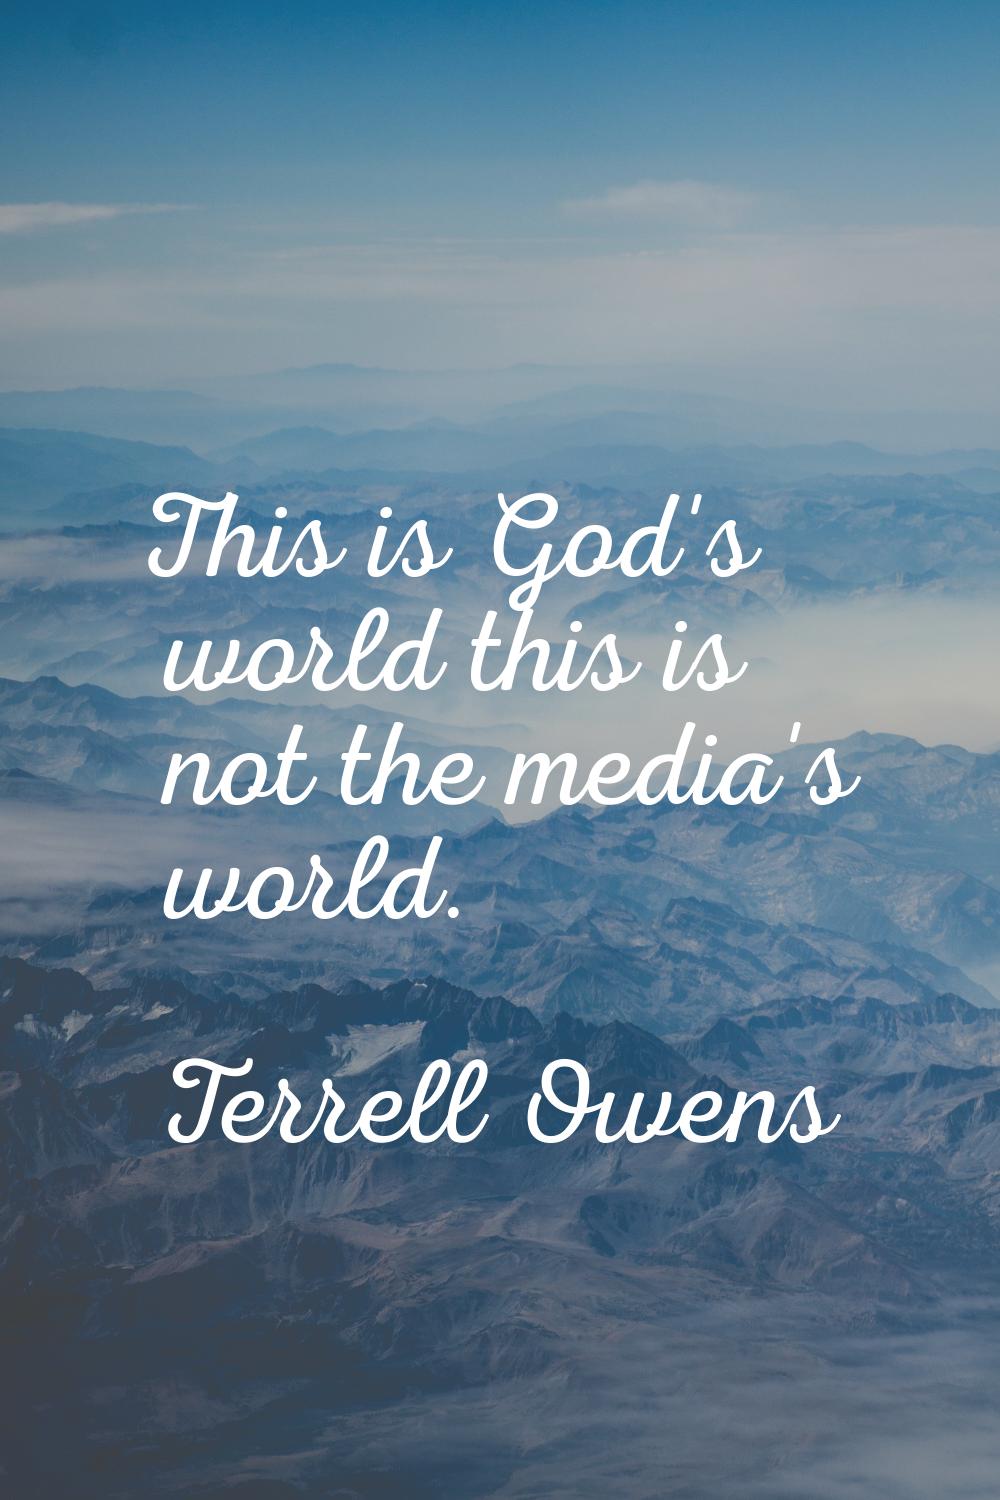 This is God's world this is not the media's world.